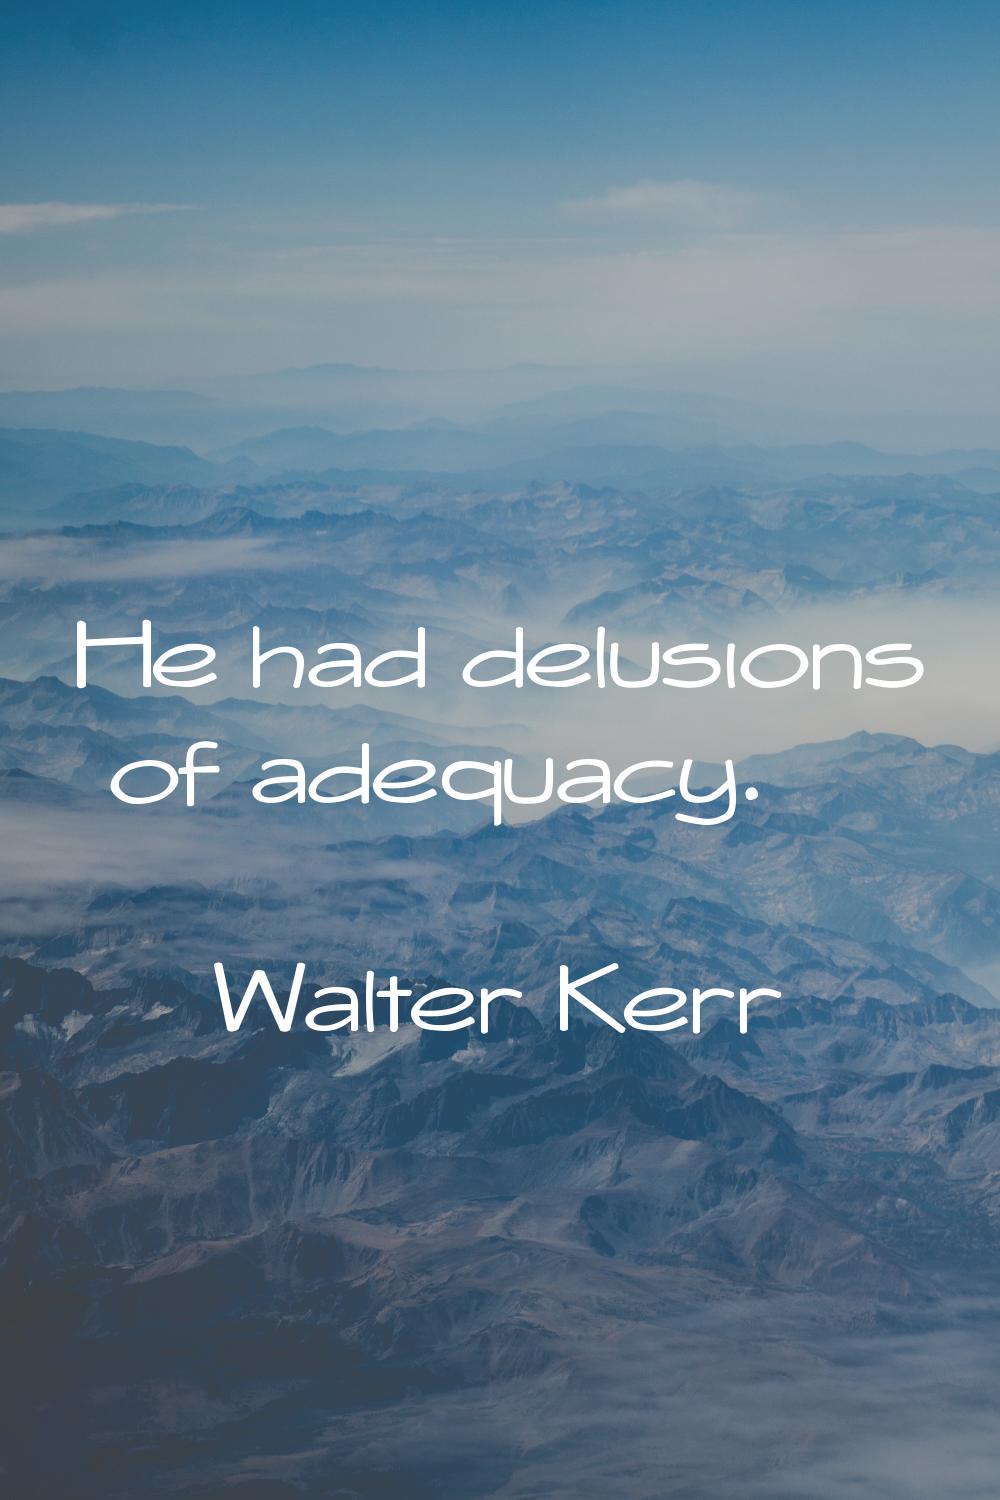 He had delusions of adequacy.